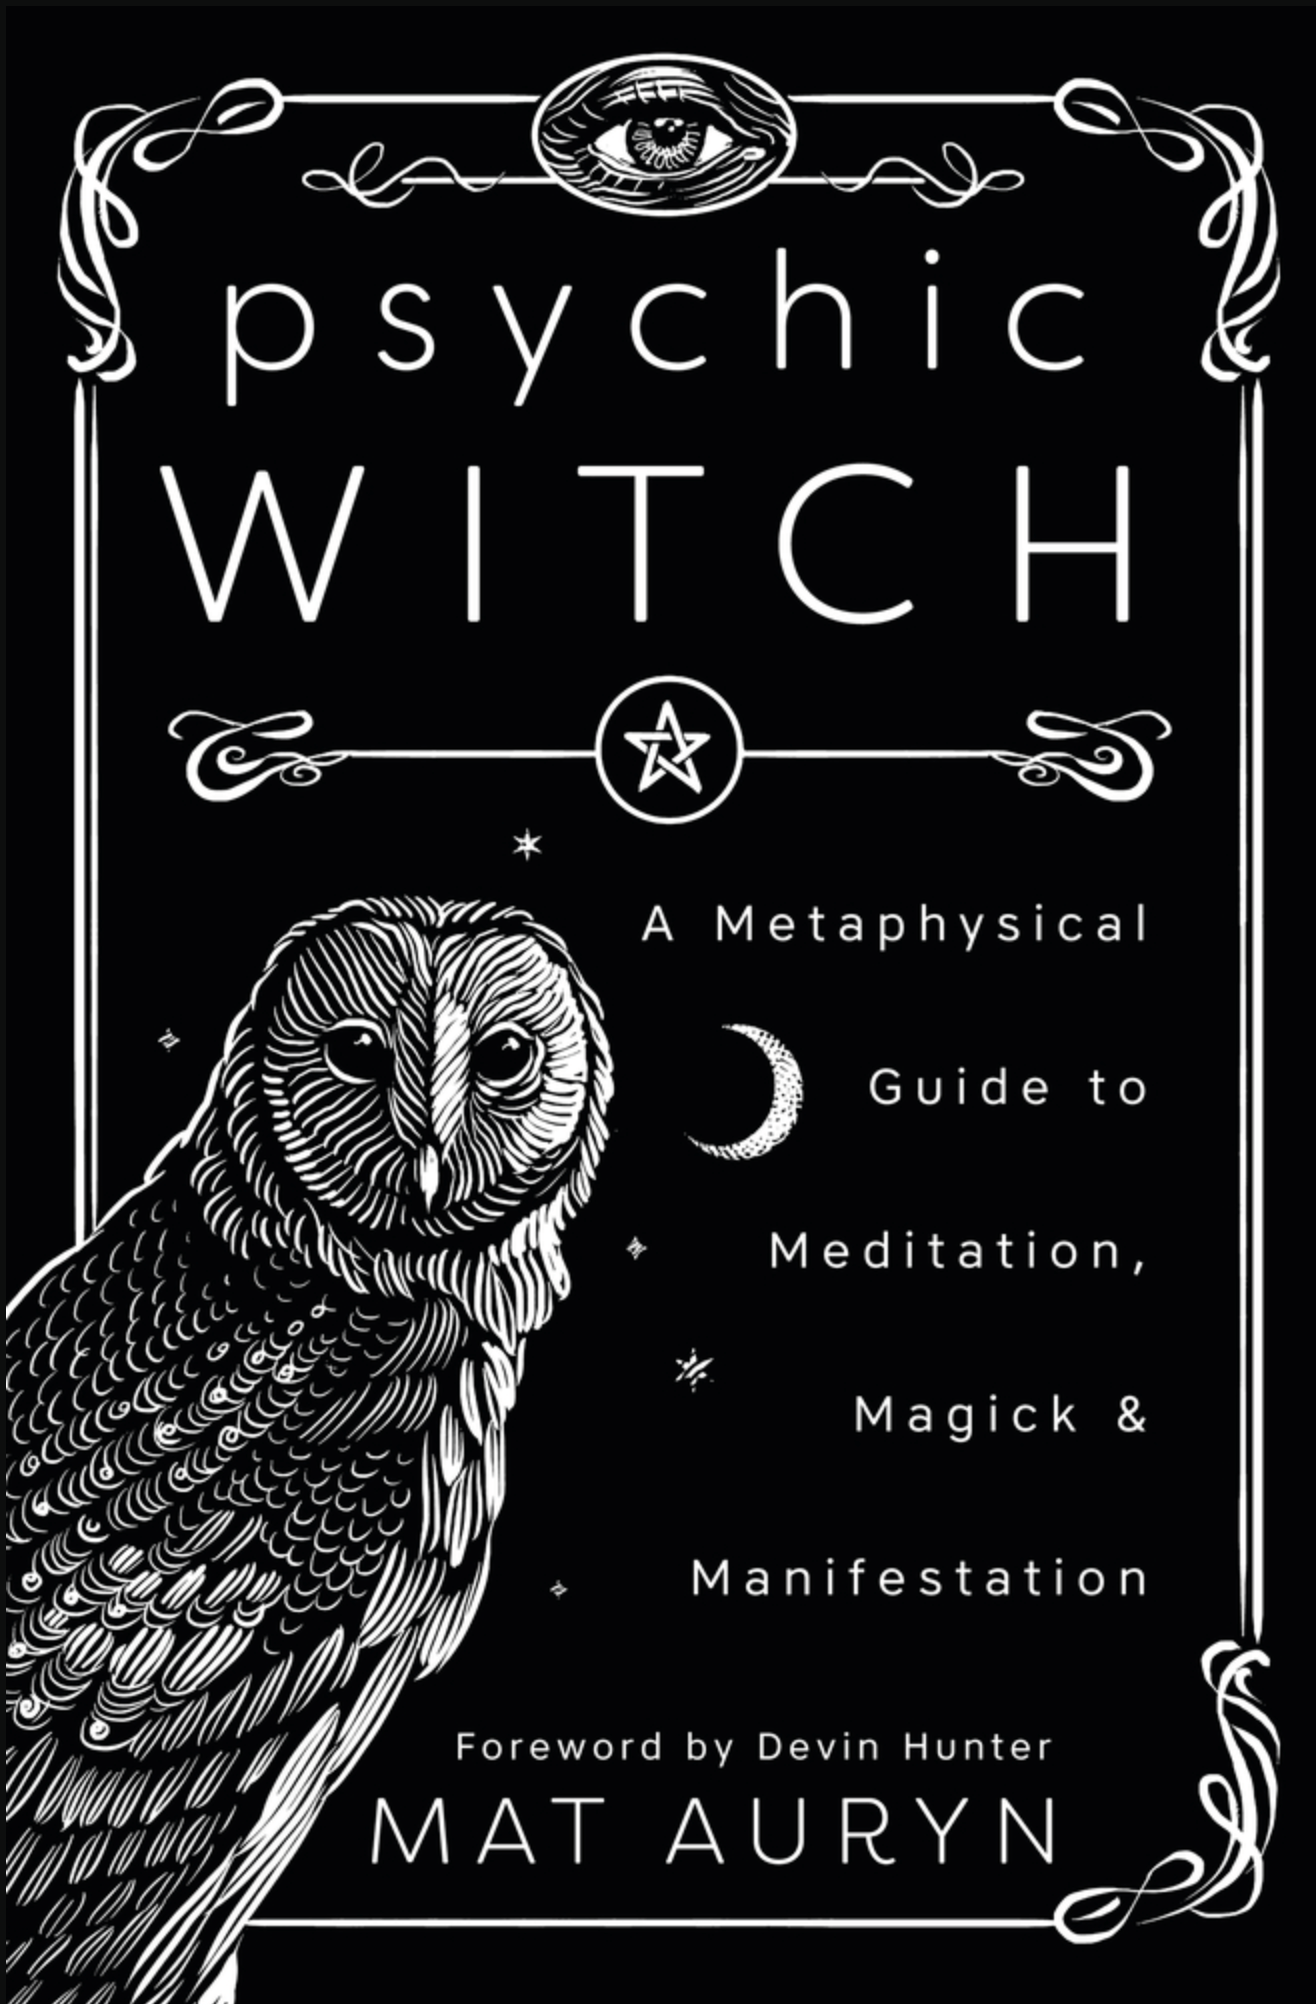 Psychic Witch | A Metaphysical Guide to Meditation, Magick & Manifestation - Spiral Circle